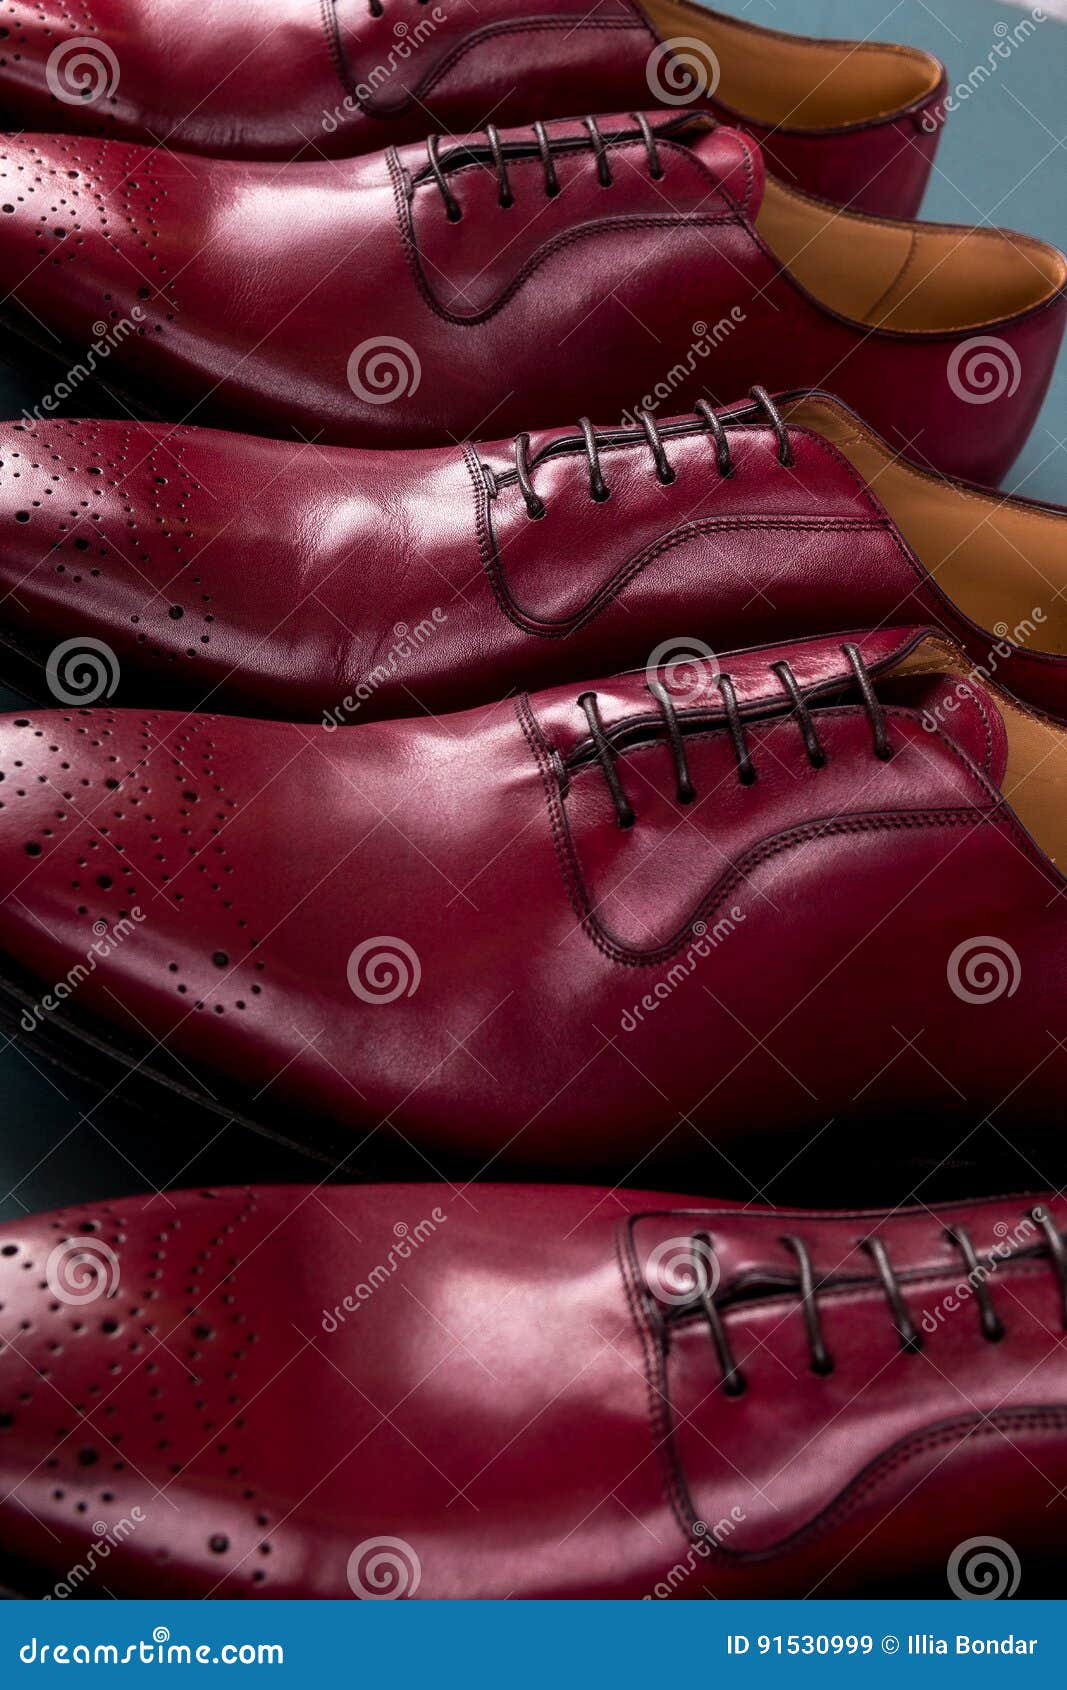 Red Oxford Shoes on Blue Background. Three Pair Brogues Stock Image ...